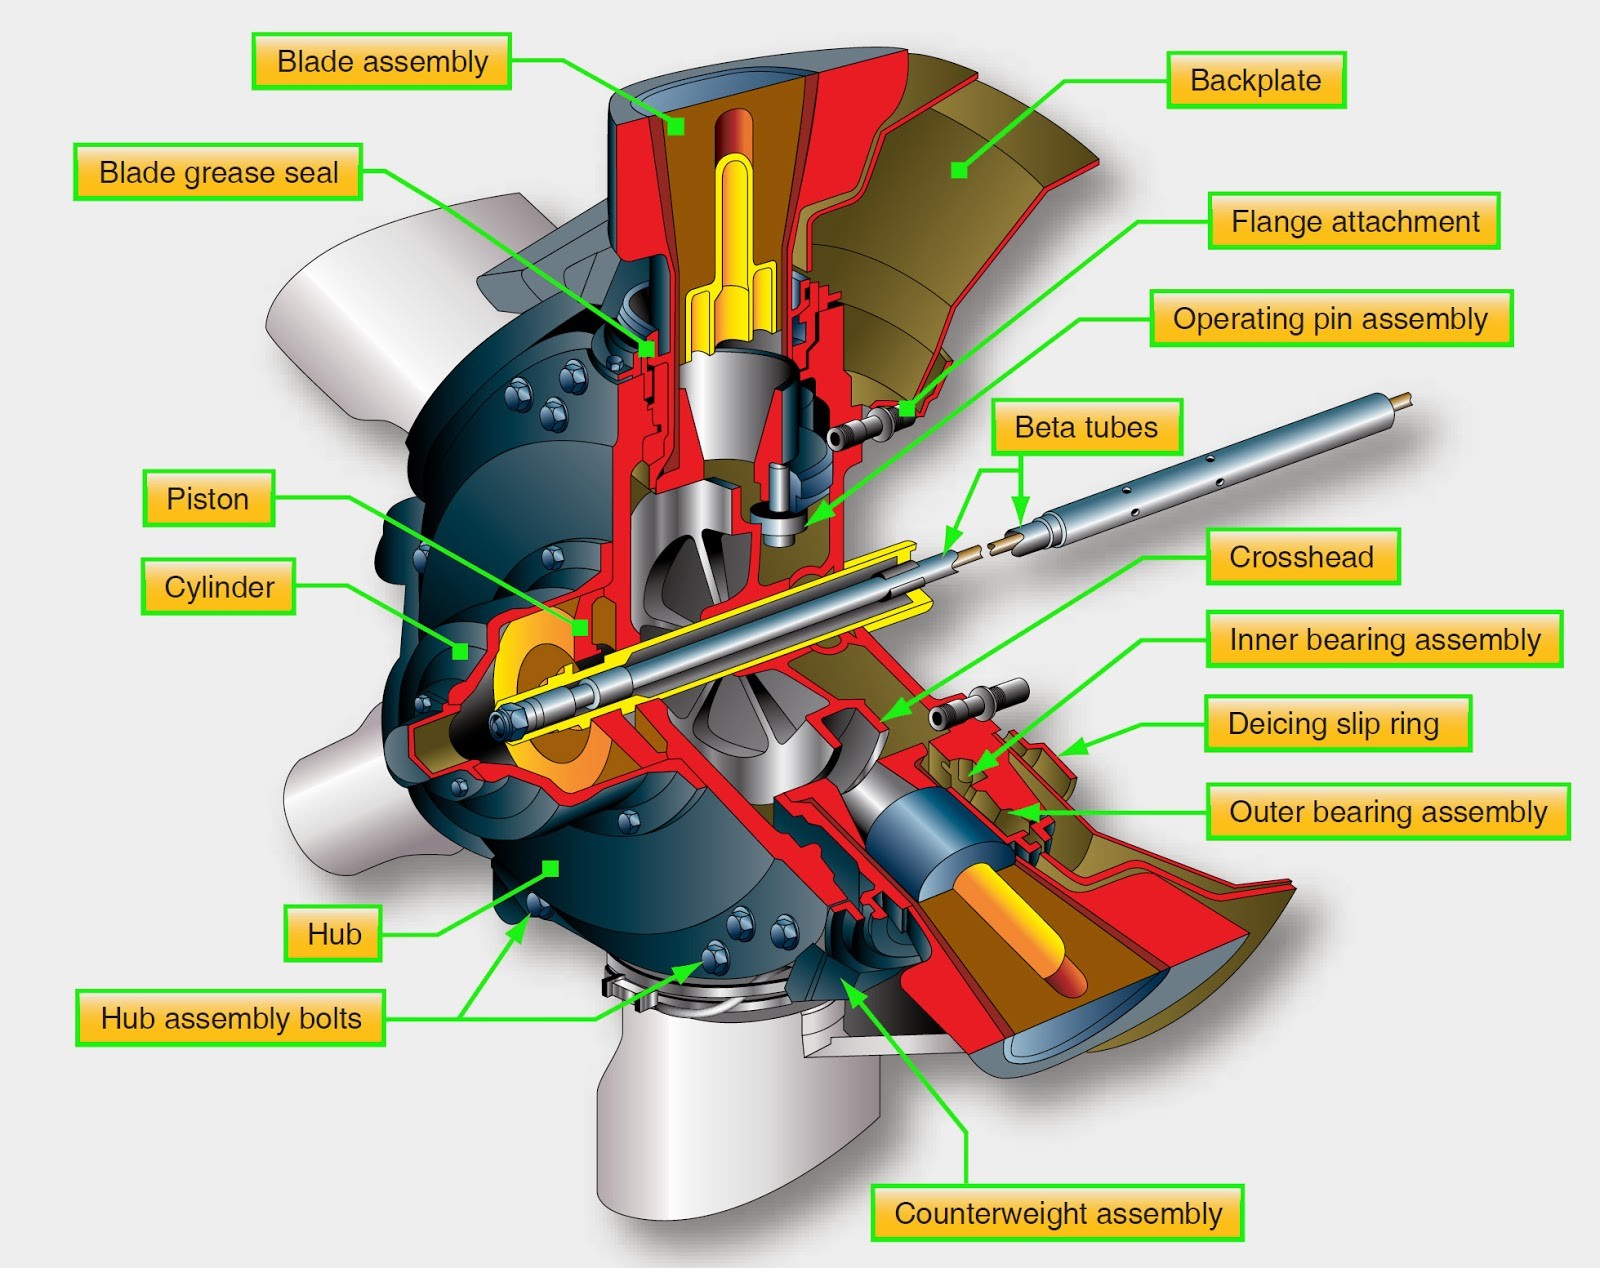 Turboprop Engine Diagram Aircraft Systems Aircraft Turboprop Engines and Propeller Control Of Turboprop Engine Diagram